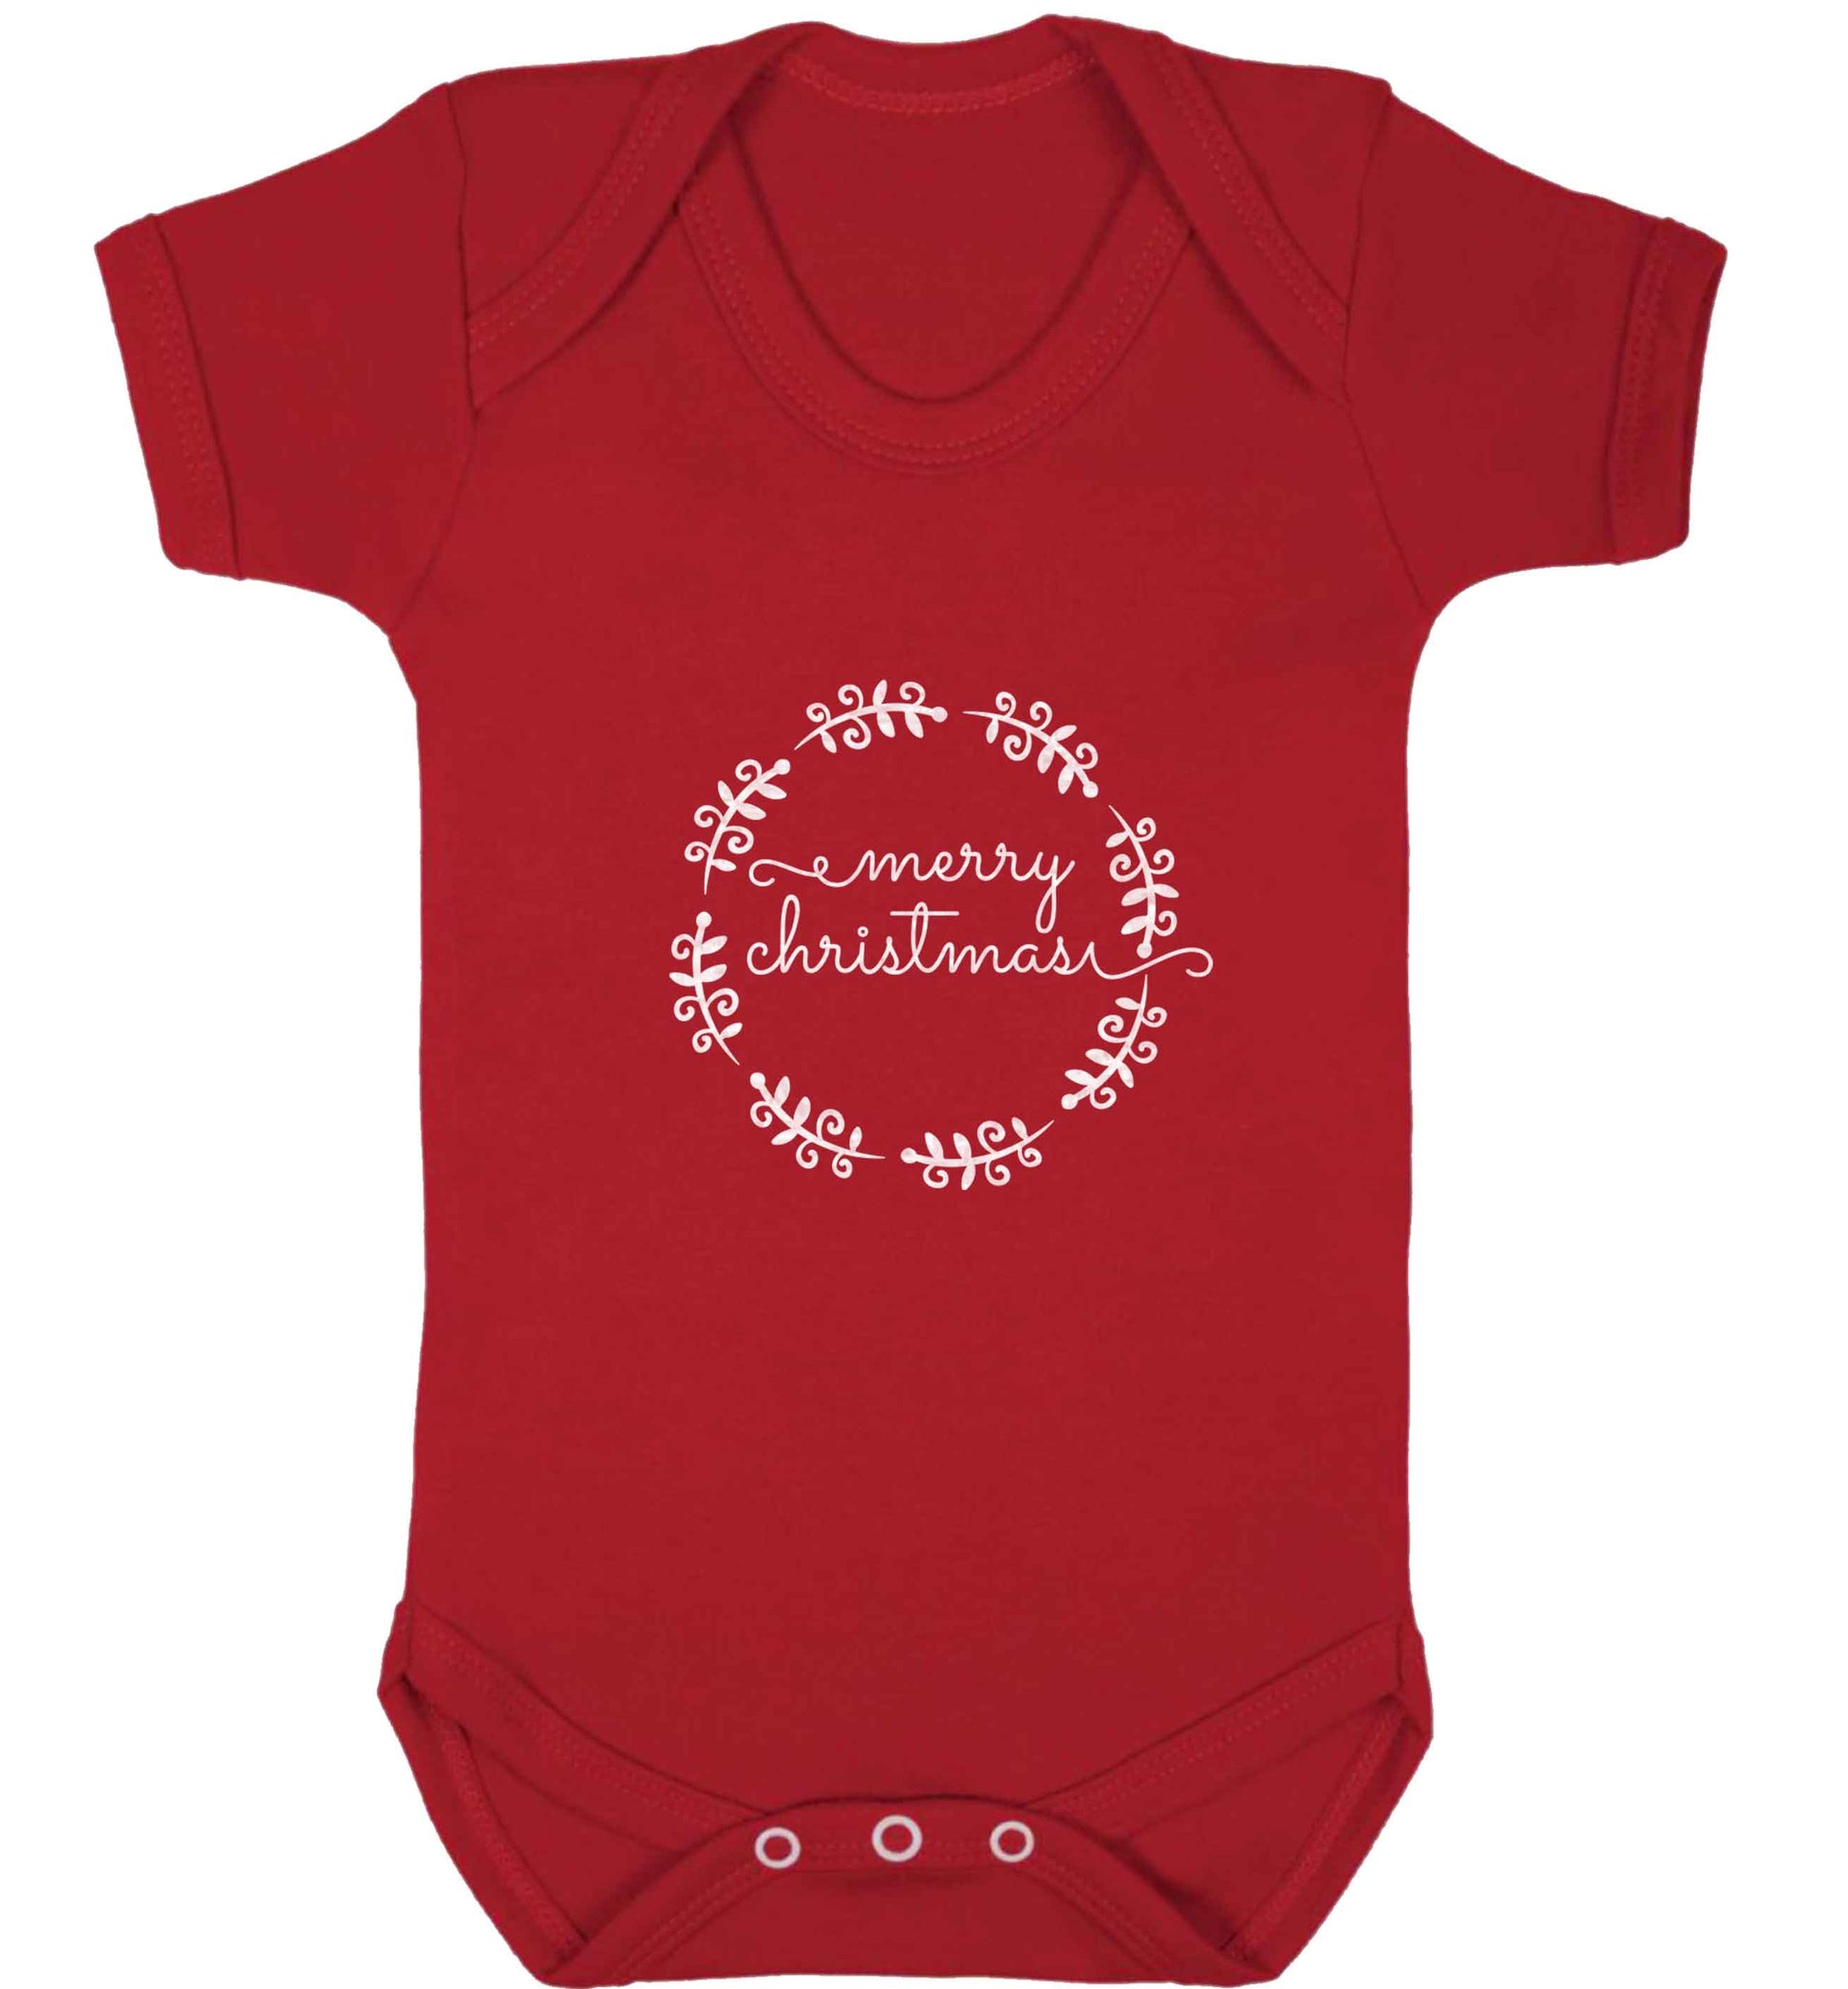 Merry christmas baby vest red 18-24 months